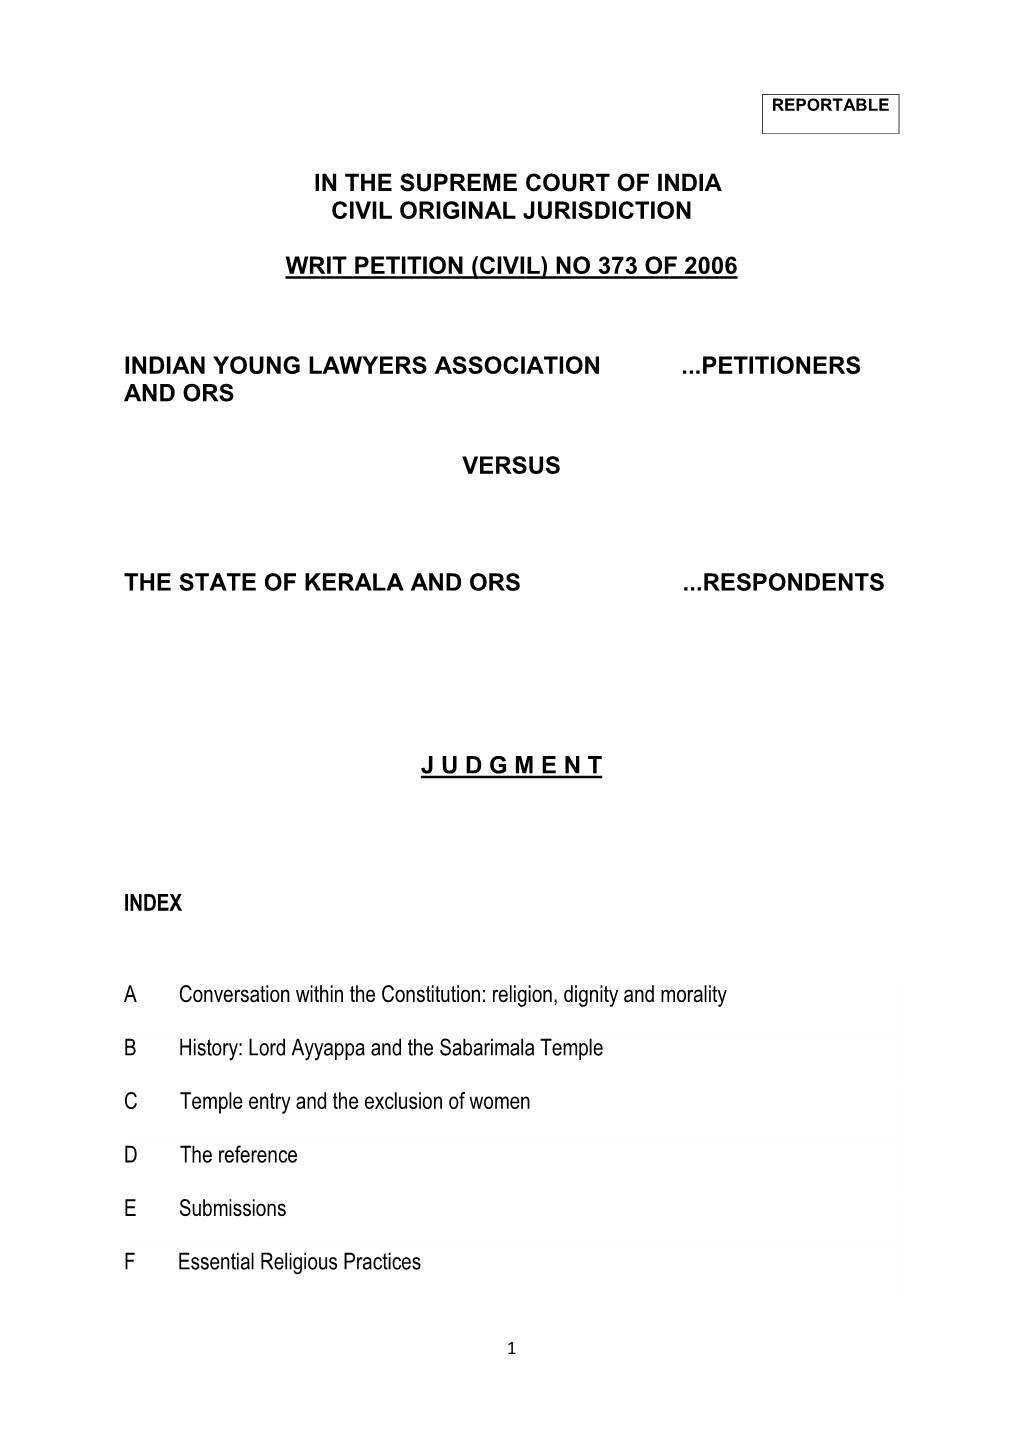 In the Supreme Court of India Civil Original Jurisdiction Writ Petition (Civil) No 373 of 2006 Indian Young Lawyers Association